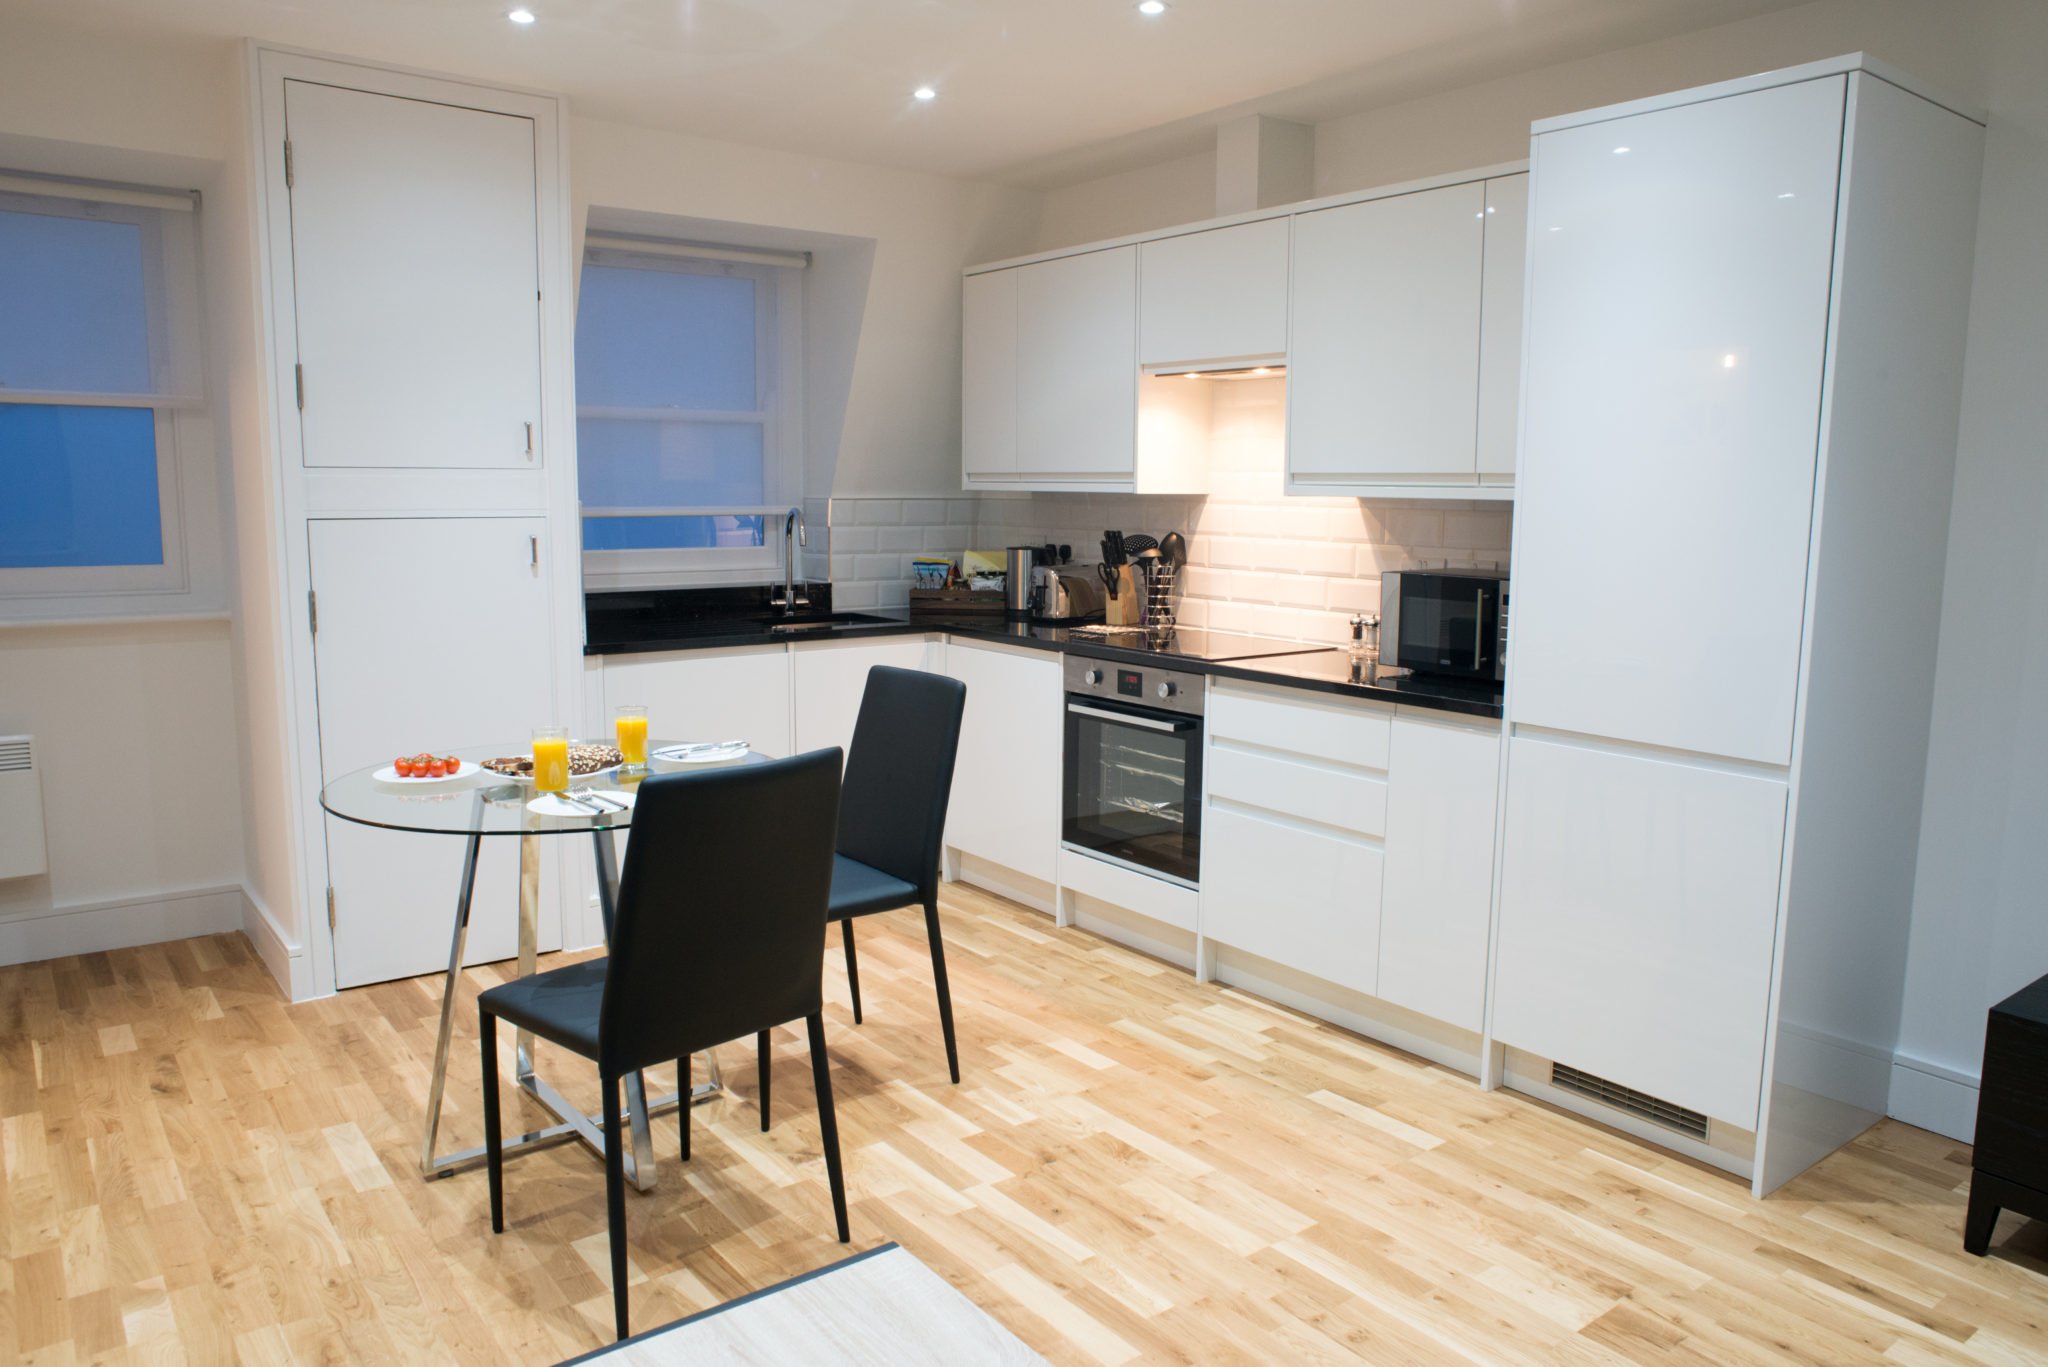 Serviced-Islington-Accommodation-East-London|-Stylish-&-cheap-Old-Street-Apartments-|-Free-Wi-Fi|-Fully-Equipped-Kitchen-|-Private-Balcony-|-0208-6913920|-Urban-Stay